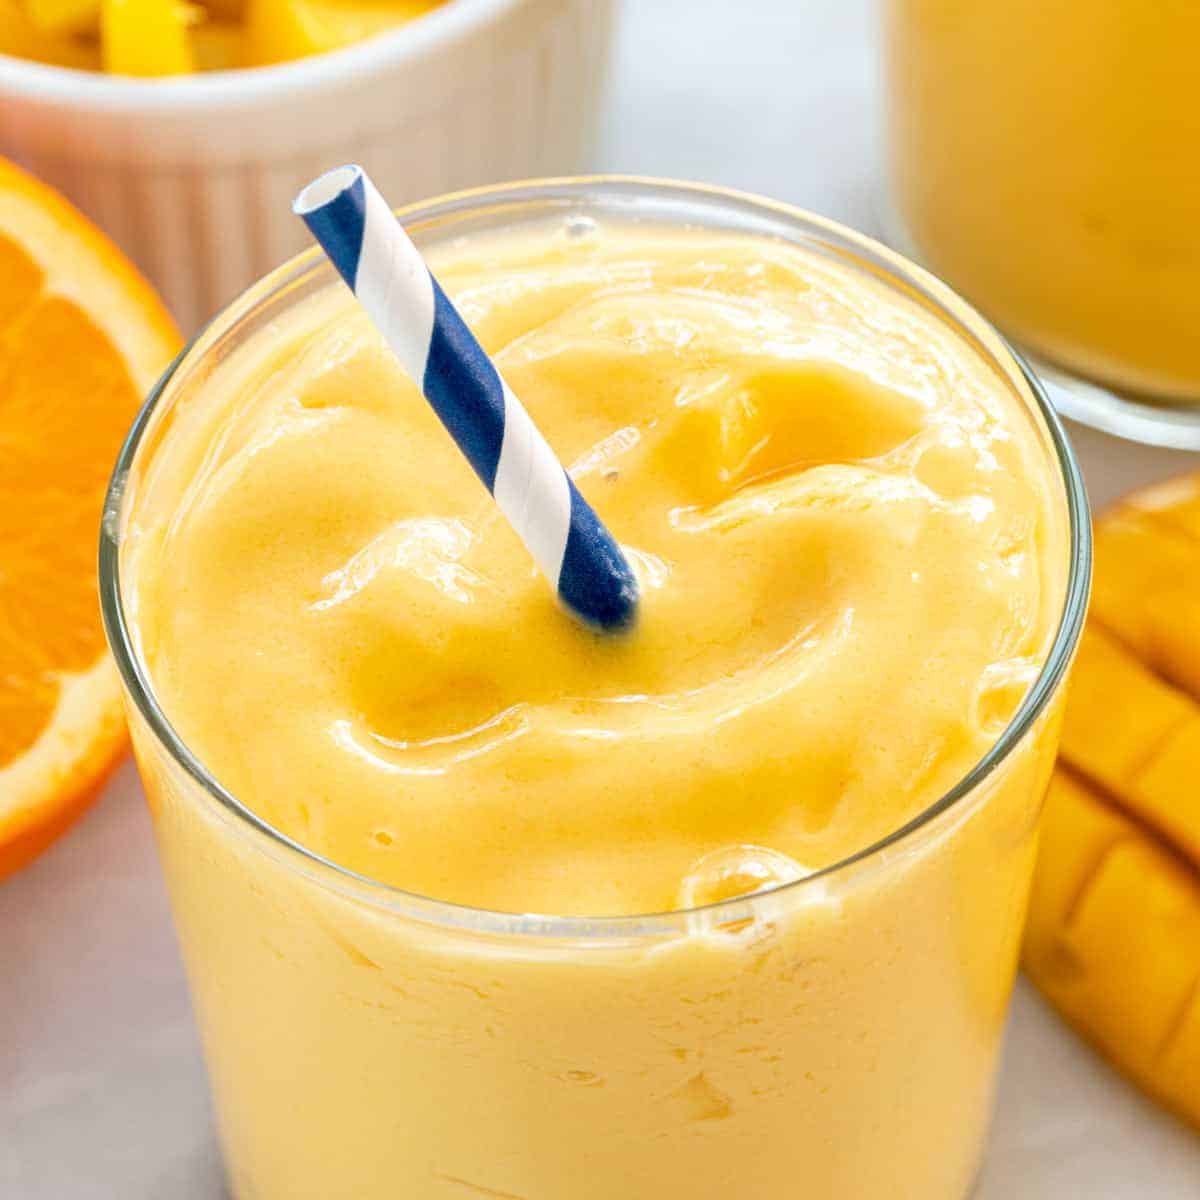 Mango smoothie in less than 30 Minutes â Recipe